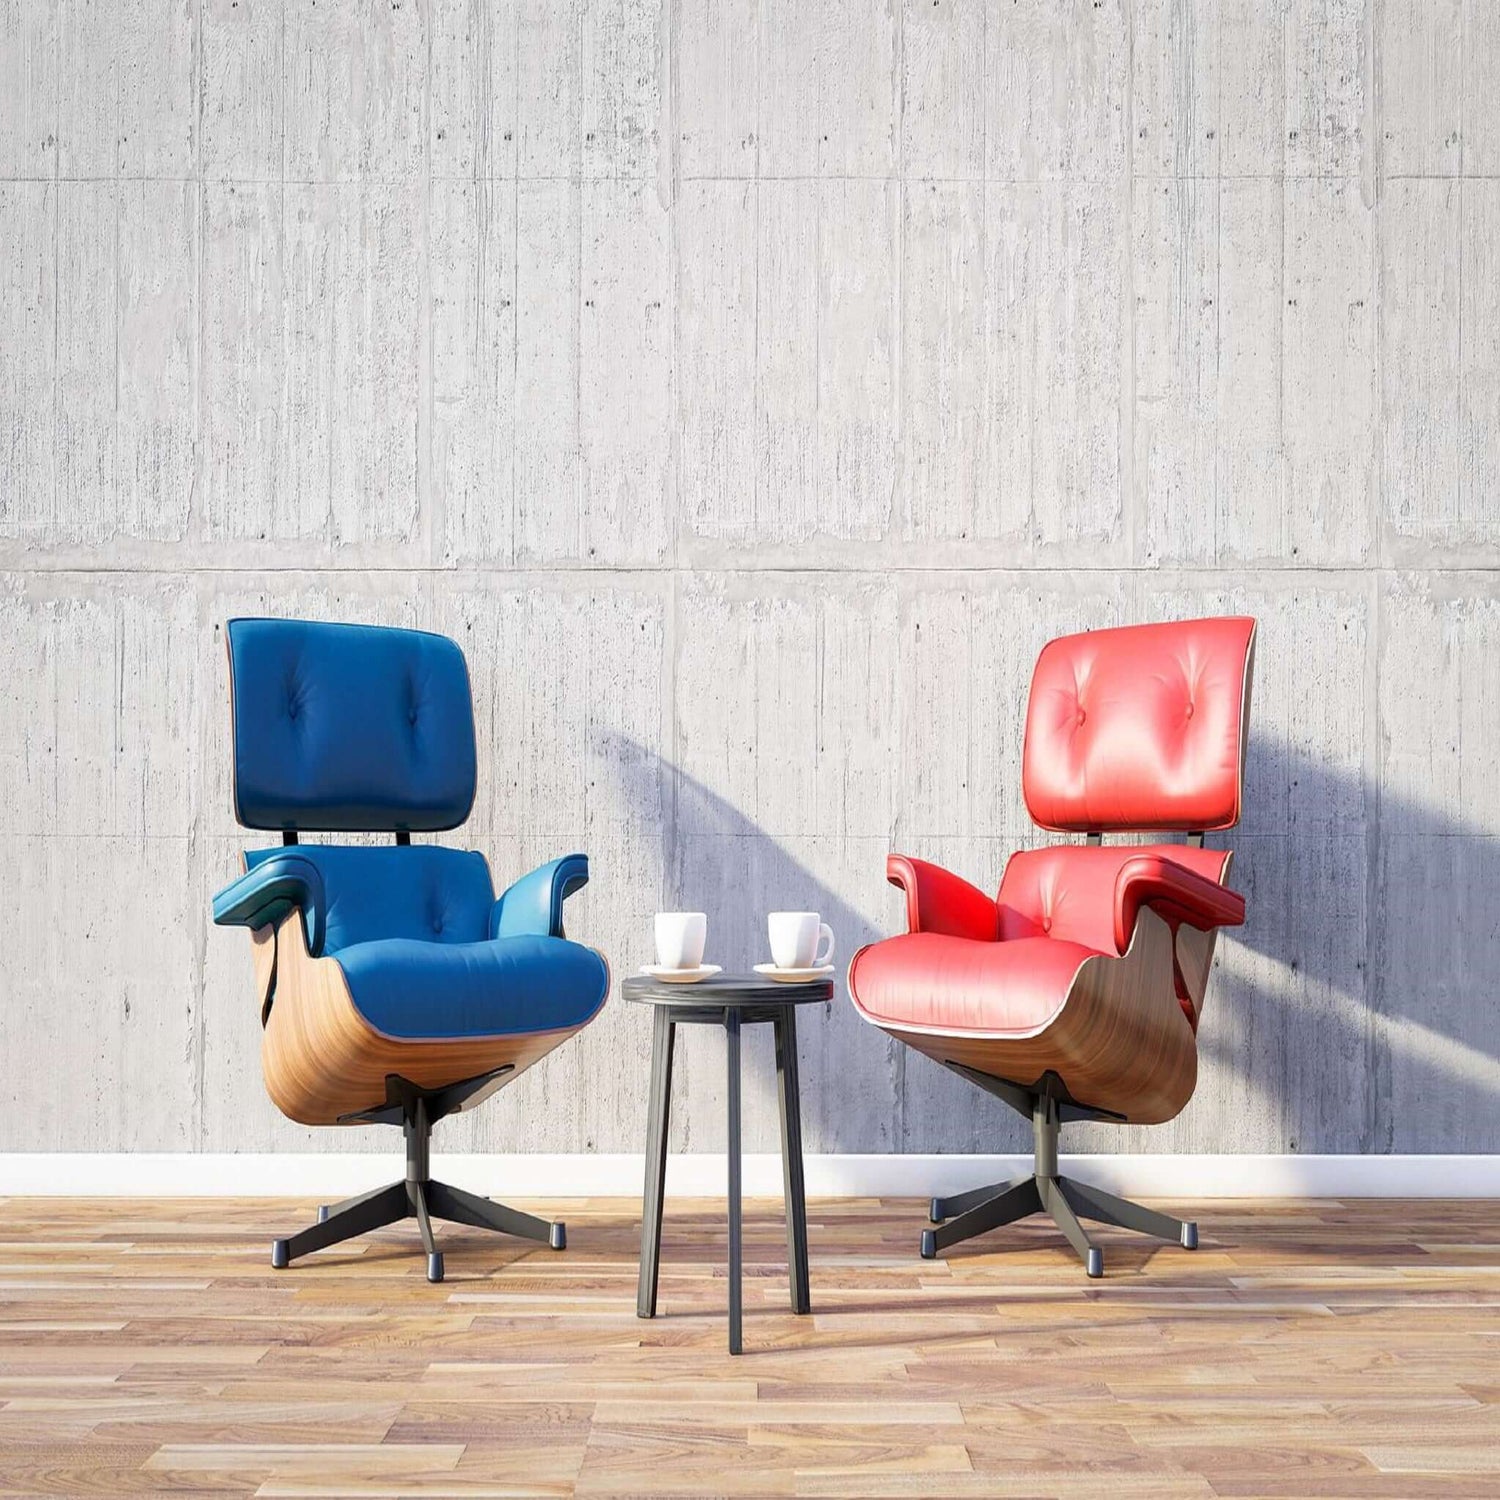 Blue and Red chairs indication a therapeutic relationship